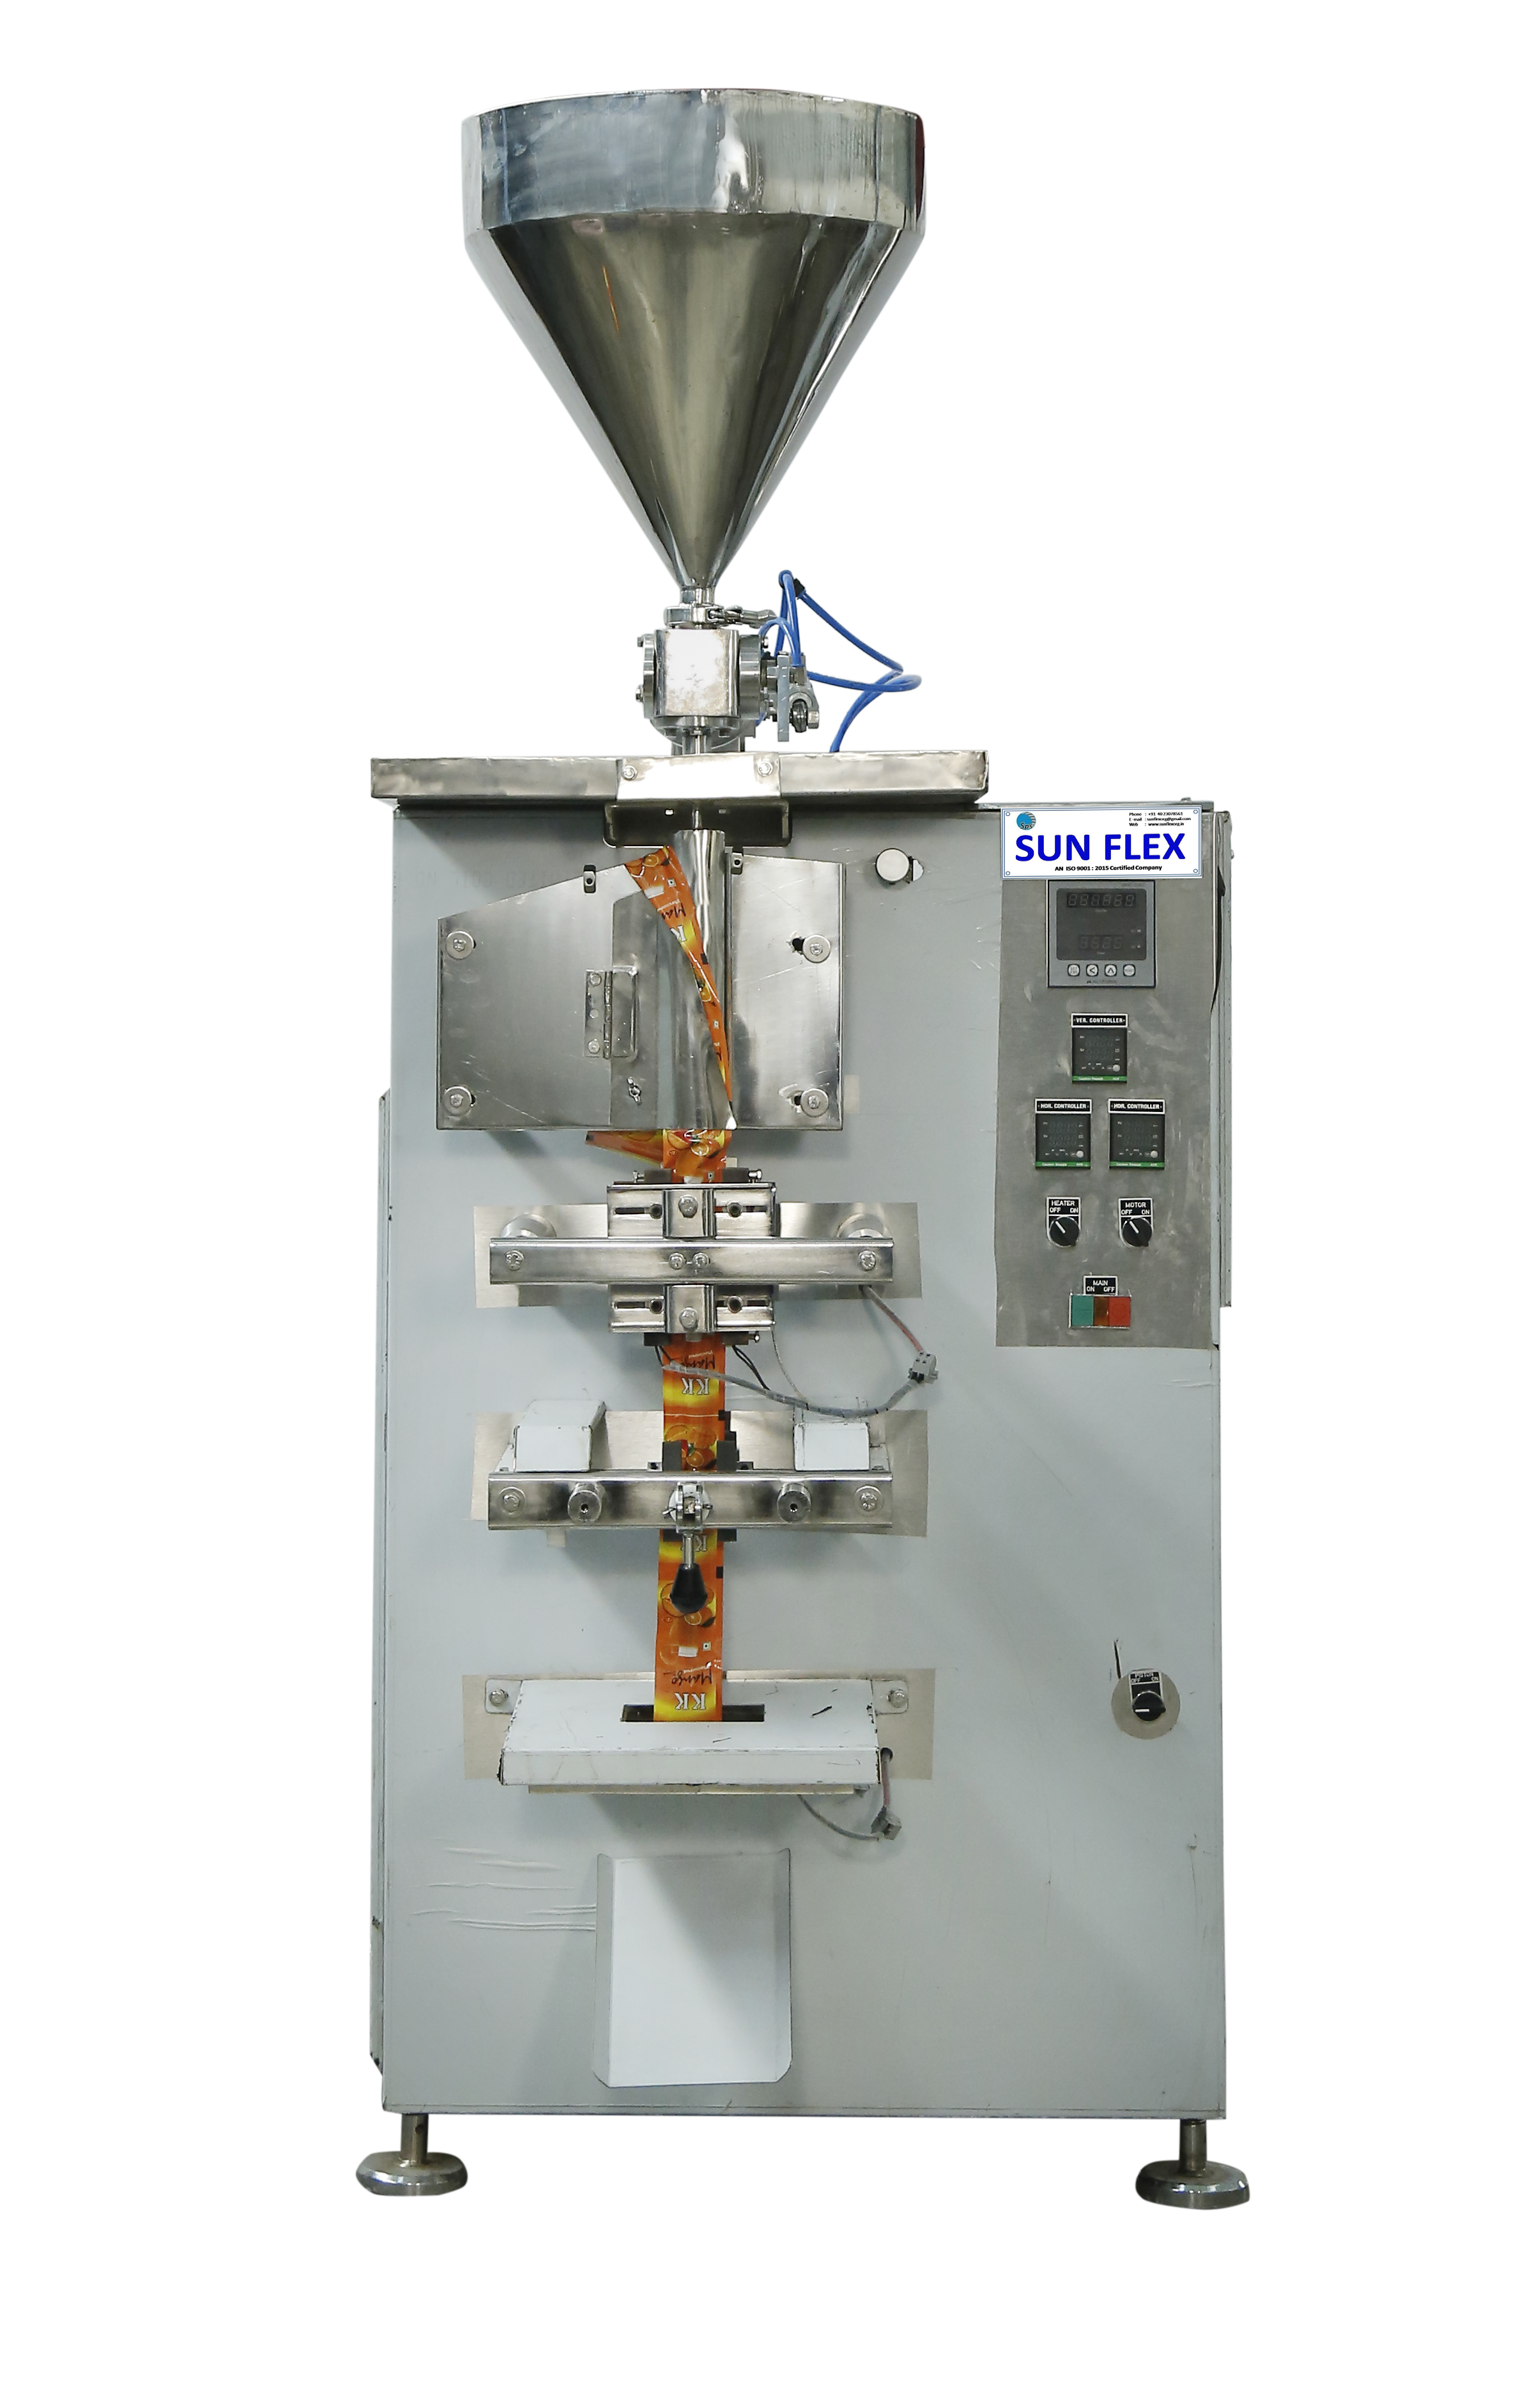 AUTOMATIC PASTE PACKING MACHINE (MODEL: SUNAUTOMATIC PASTE PACKING MACHINE (MODEL: SUNFLEX - 4SV-100)FLEX - 4SV-100)